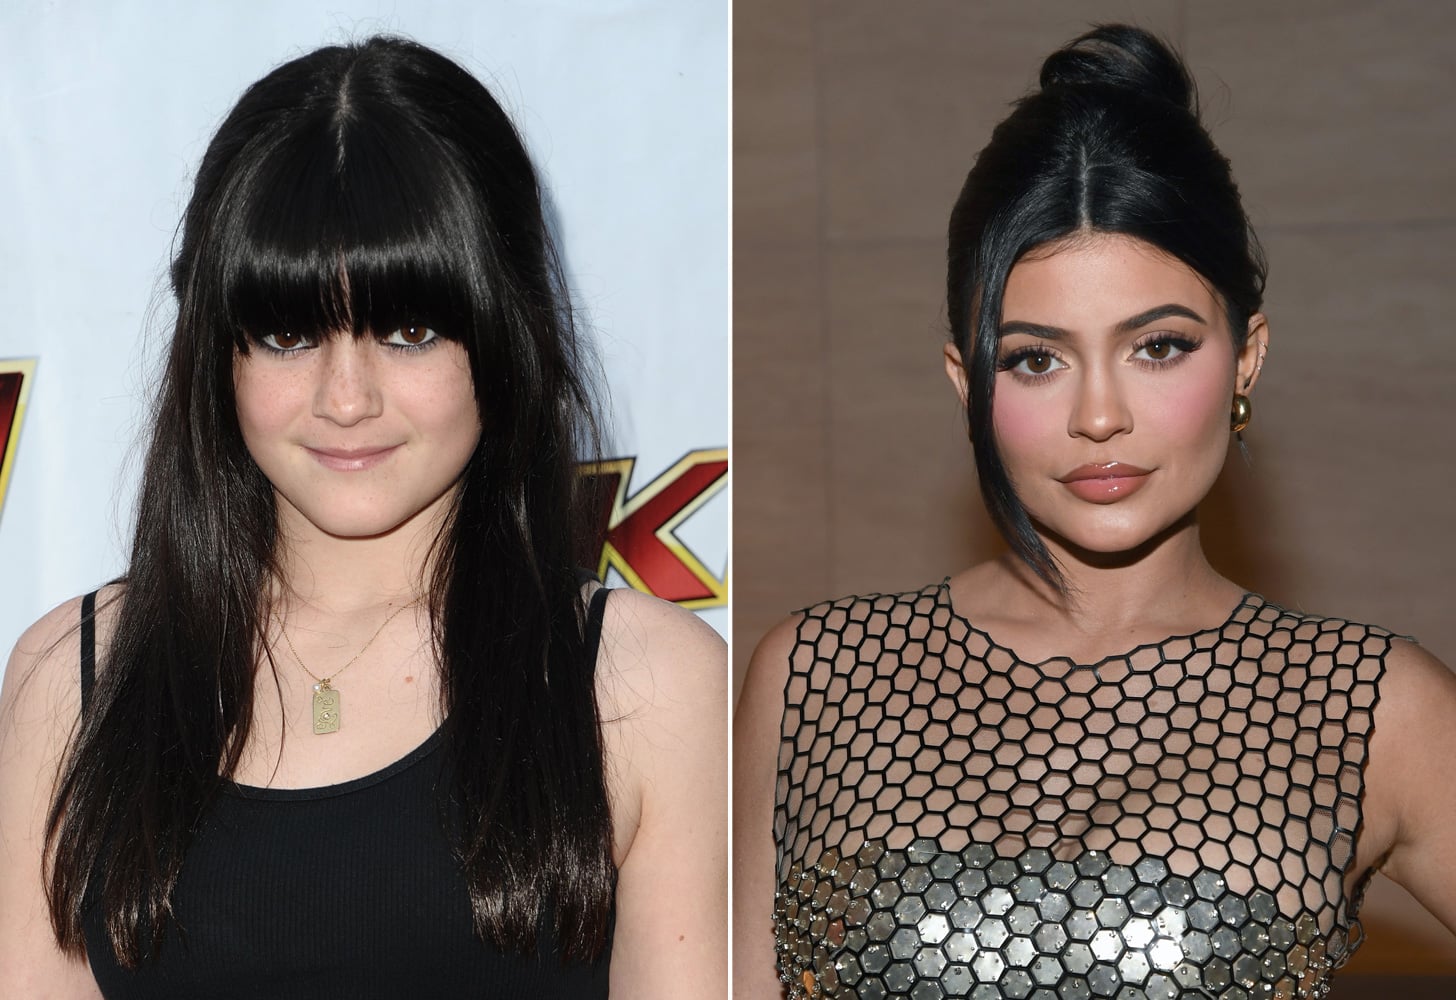 Kylie Jenner faces criticism over photo of two-year-old daughter